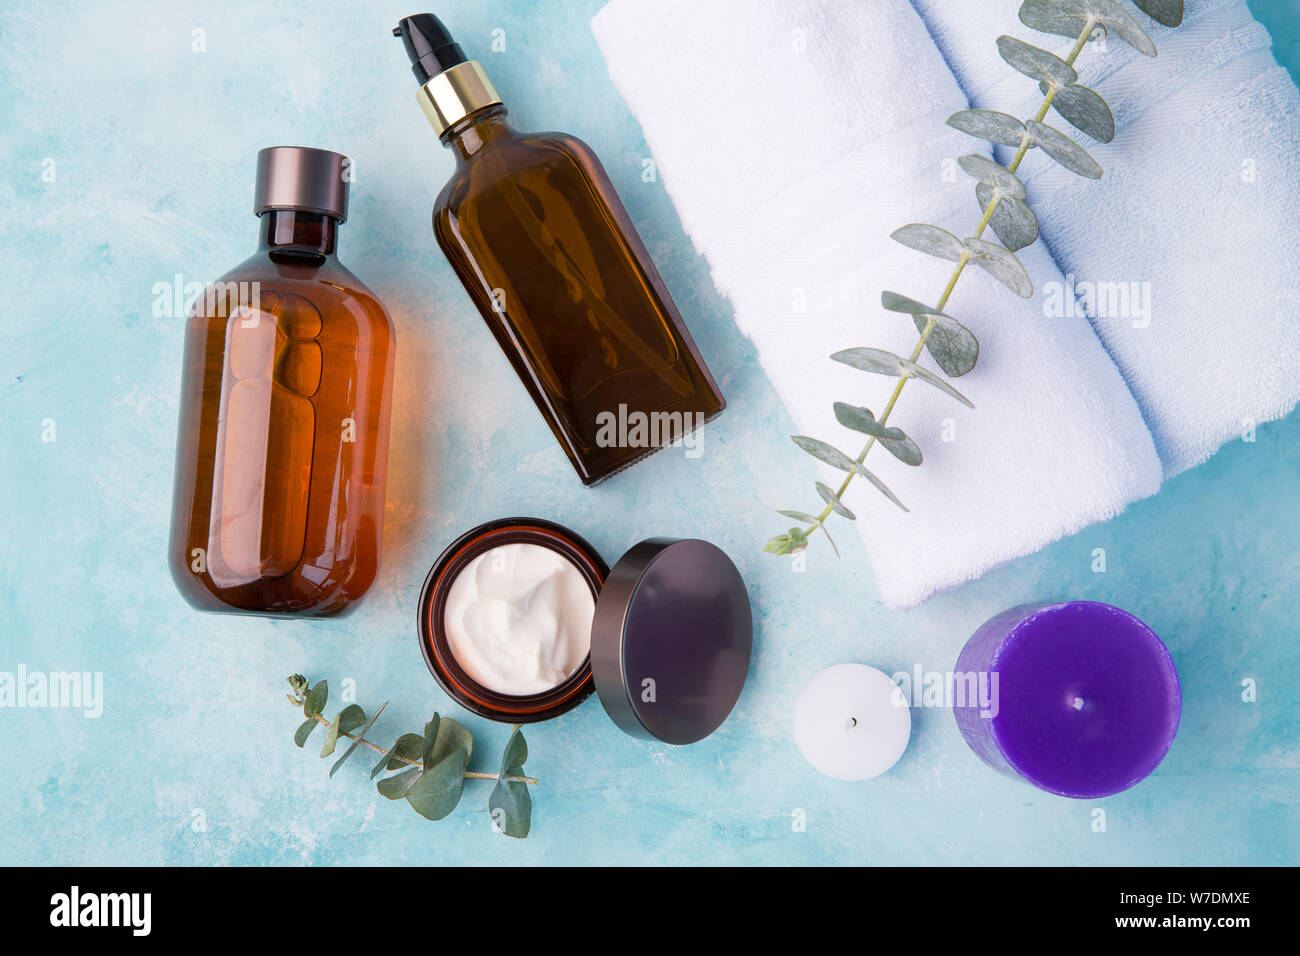 Beauty care concept, Various skin and body care products 168 Stock Photo